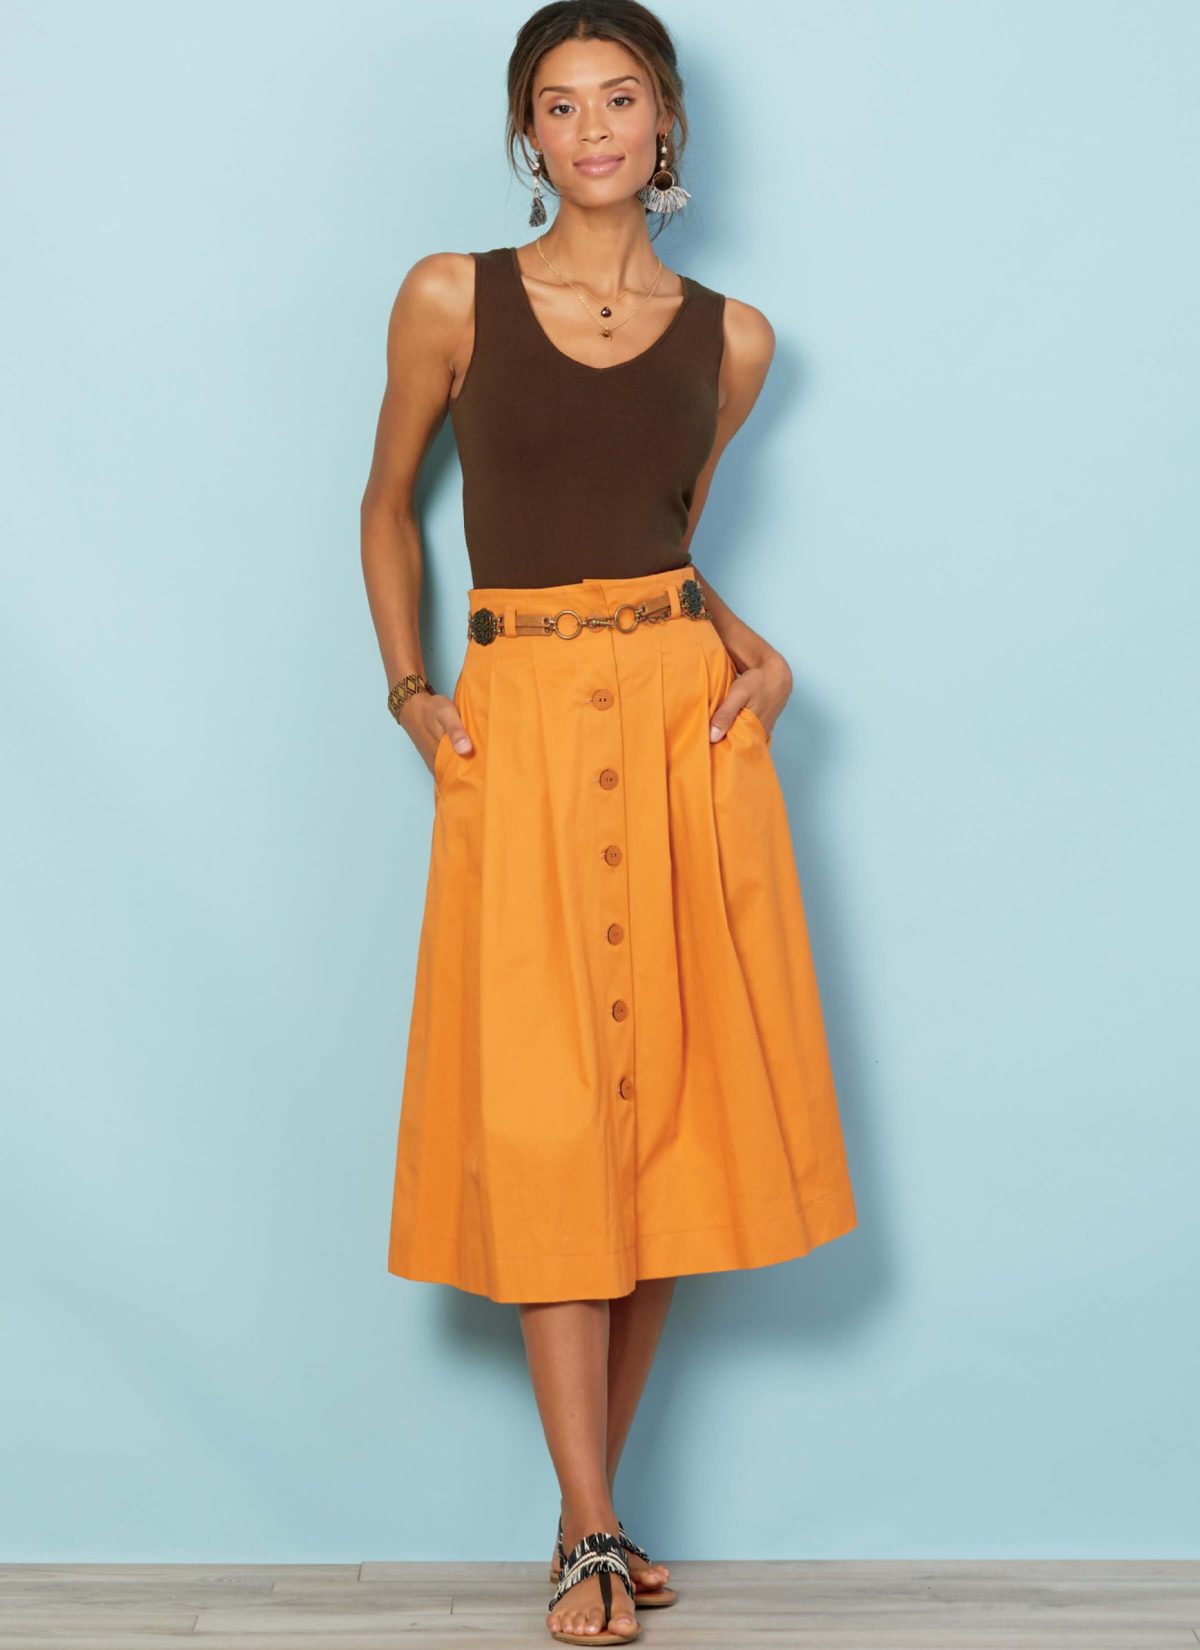 McCall's Sewing Pattern M7906 Misses' Skirts